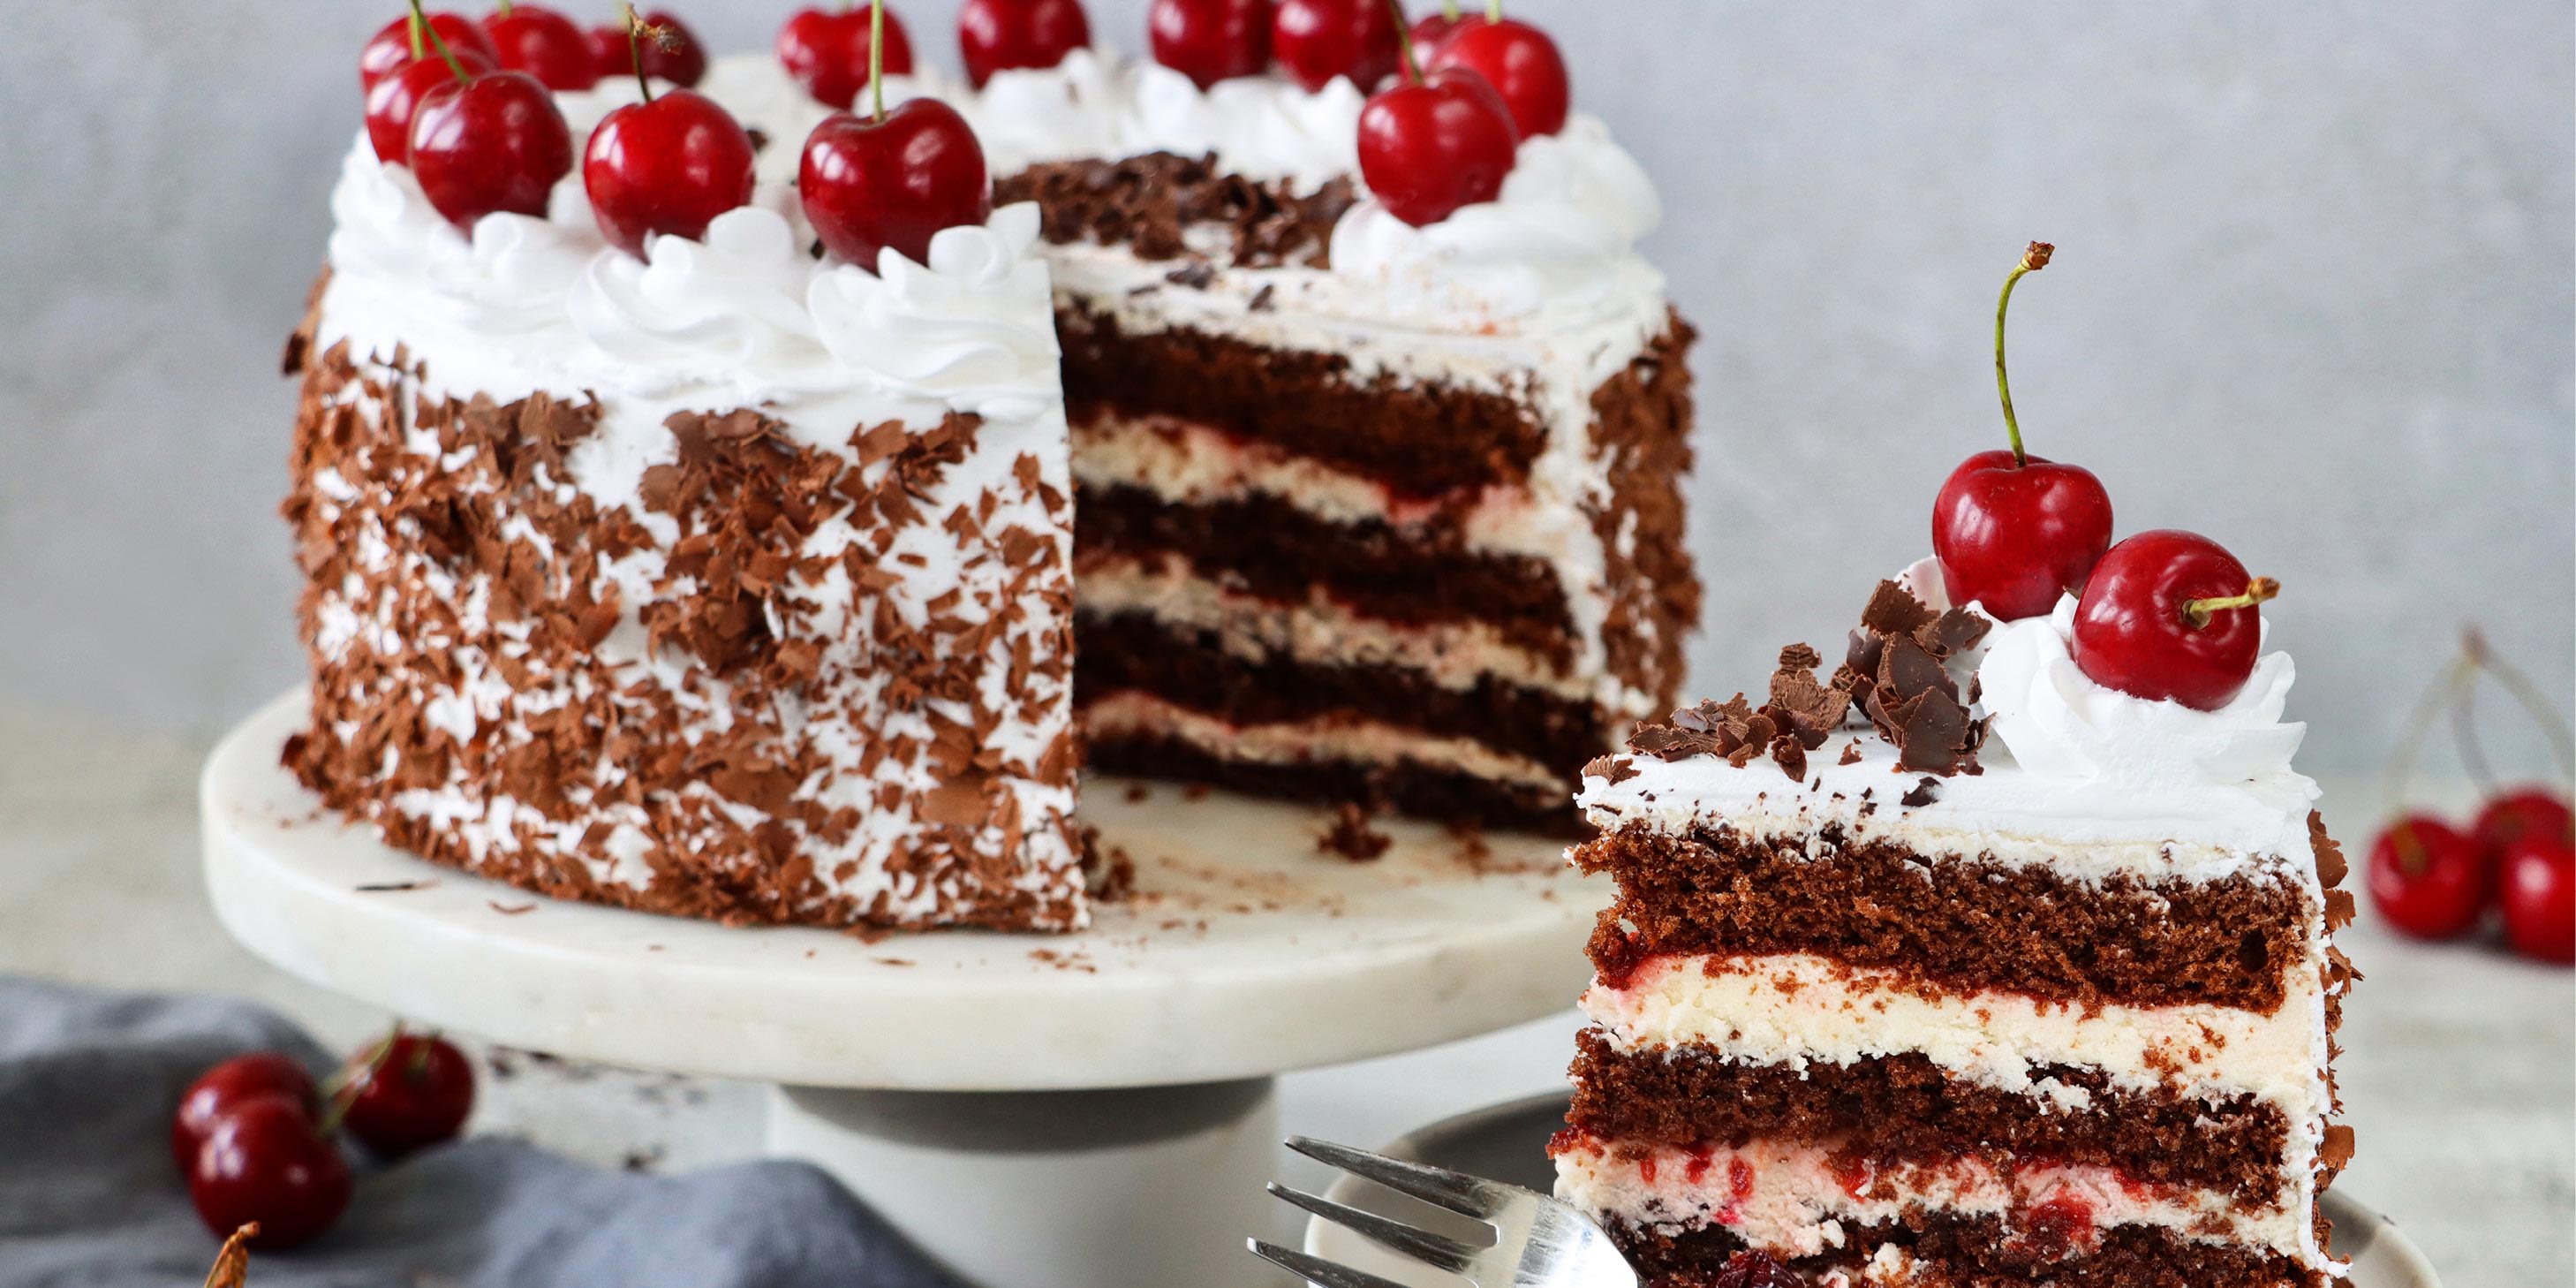 A slice of German Black Forest gateaux with cherries on top